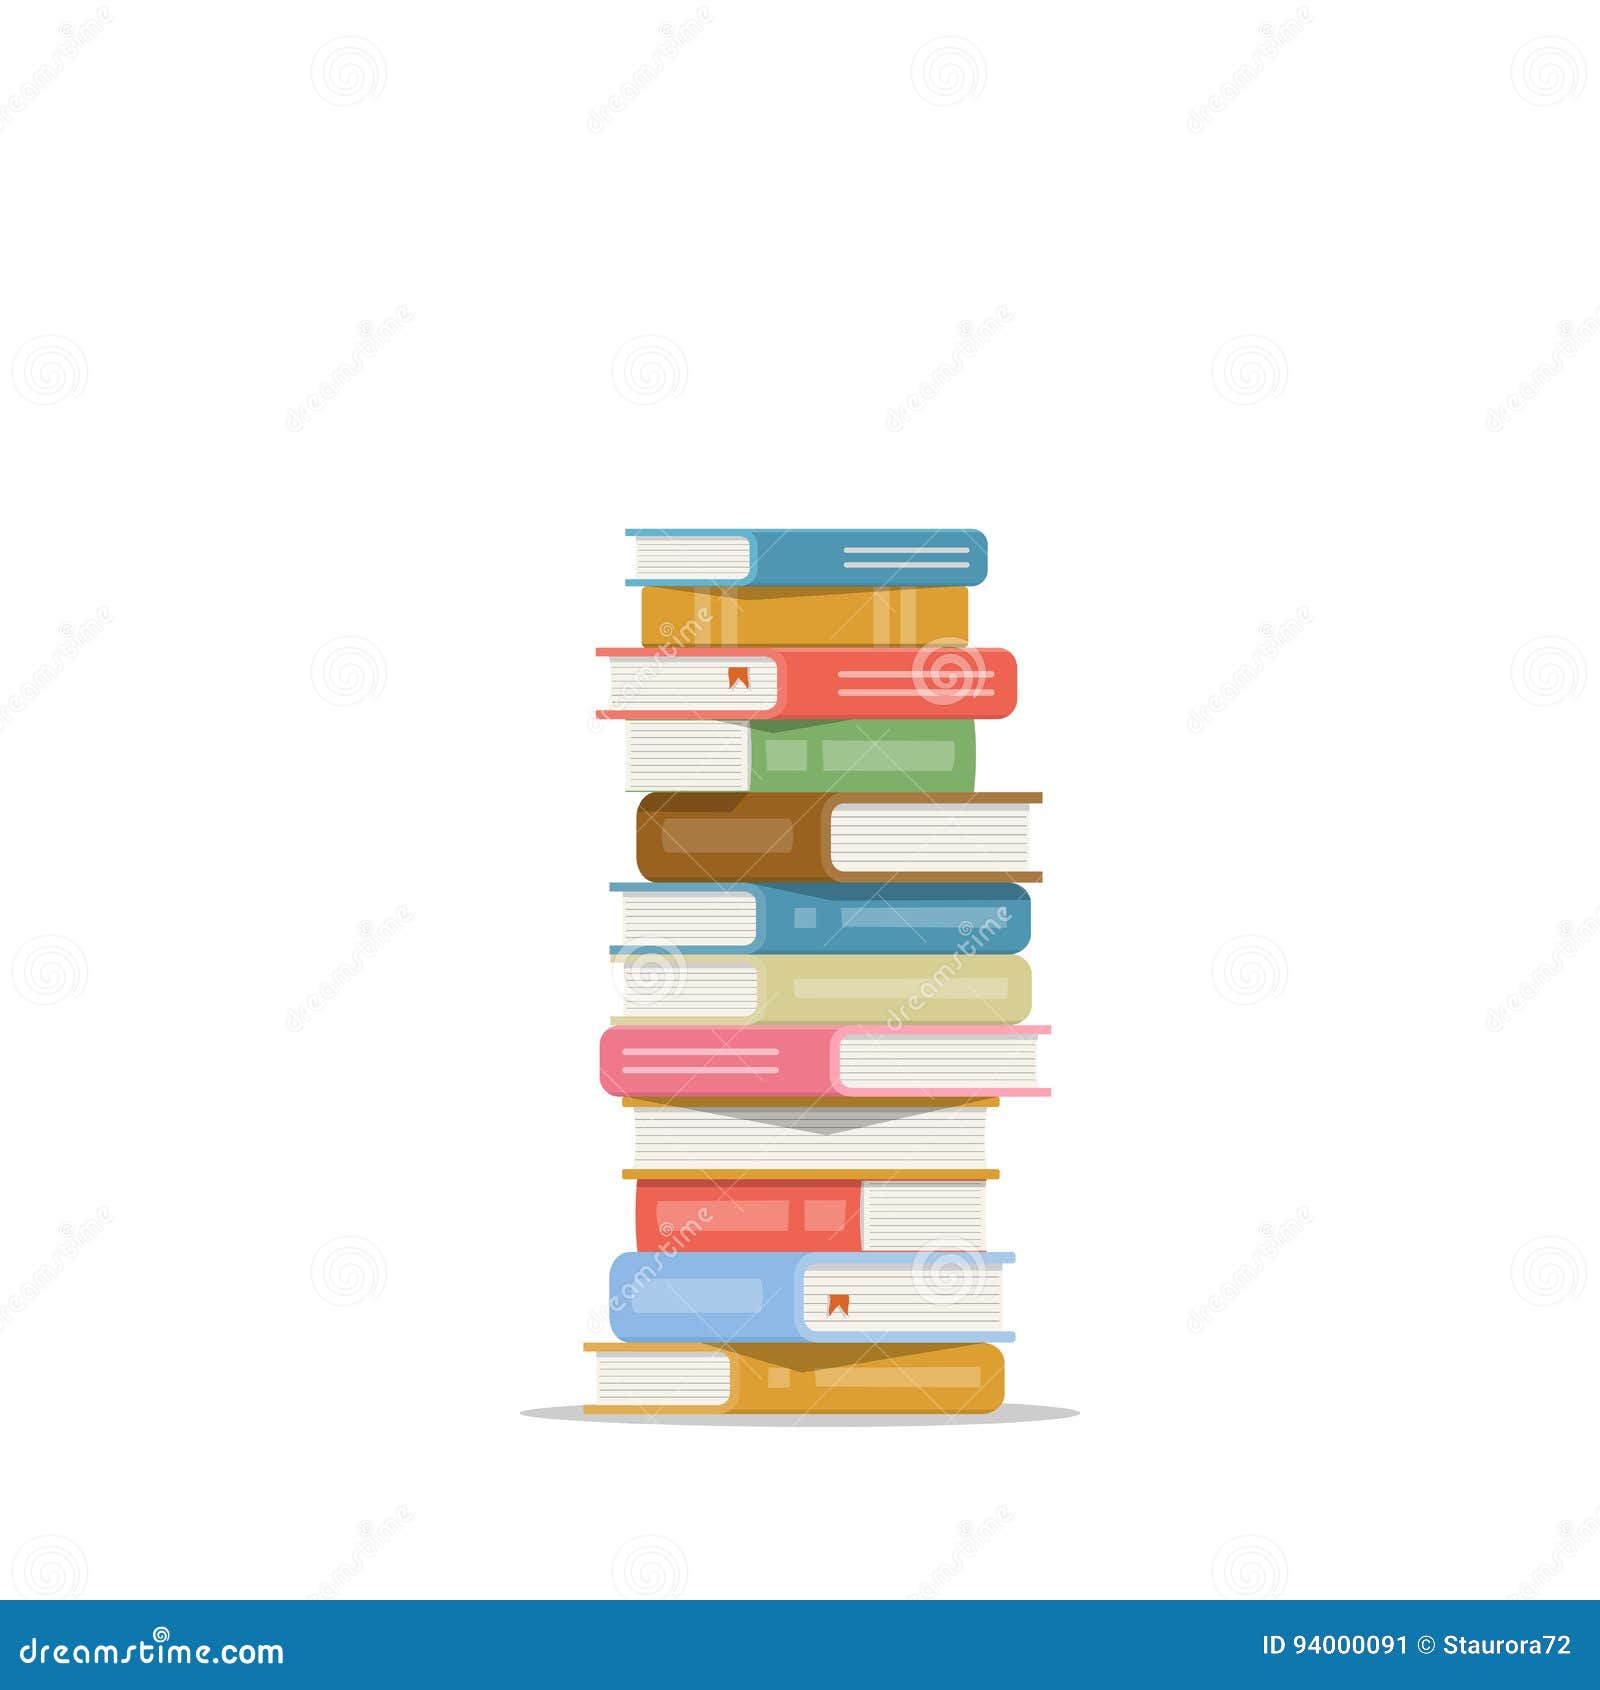 stack of books on a white background. pile of books  . icon stack of books in flat style